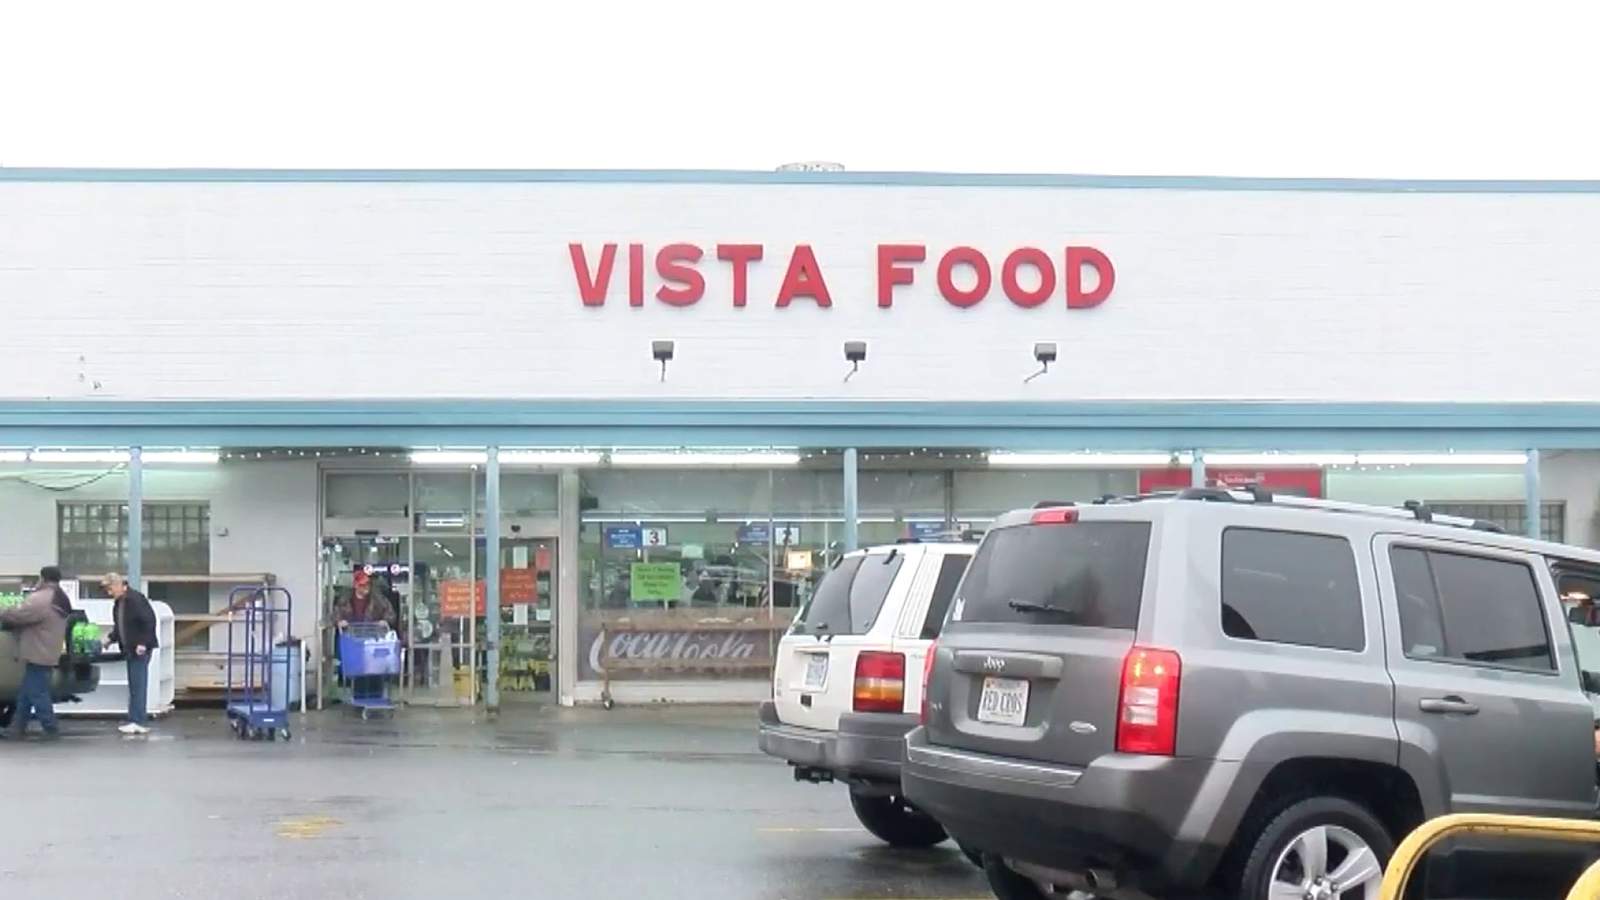 ’I’m really disappointed’: Vista Food grocery store in Bedford closes after 50 years